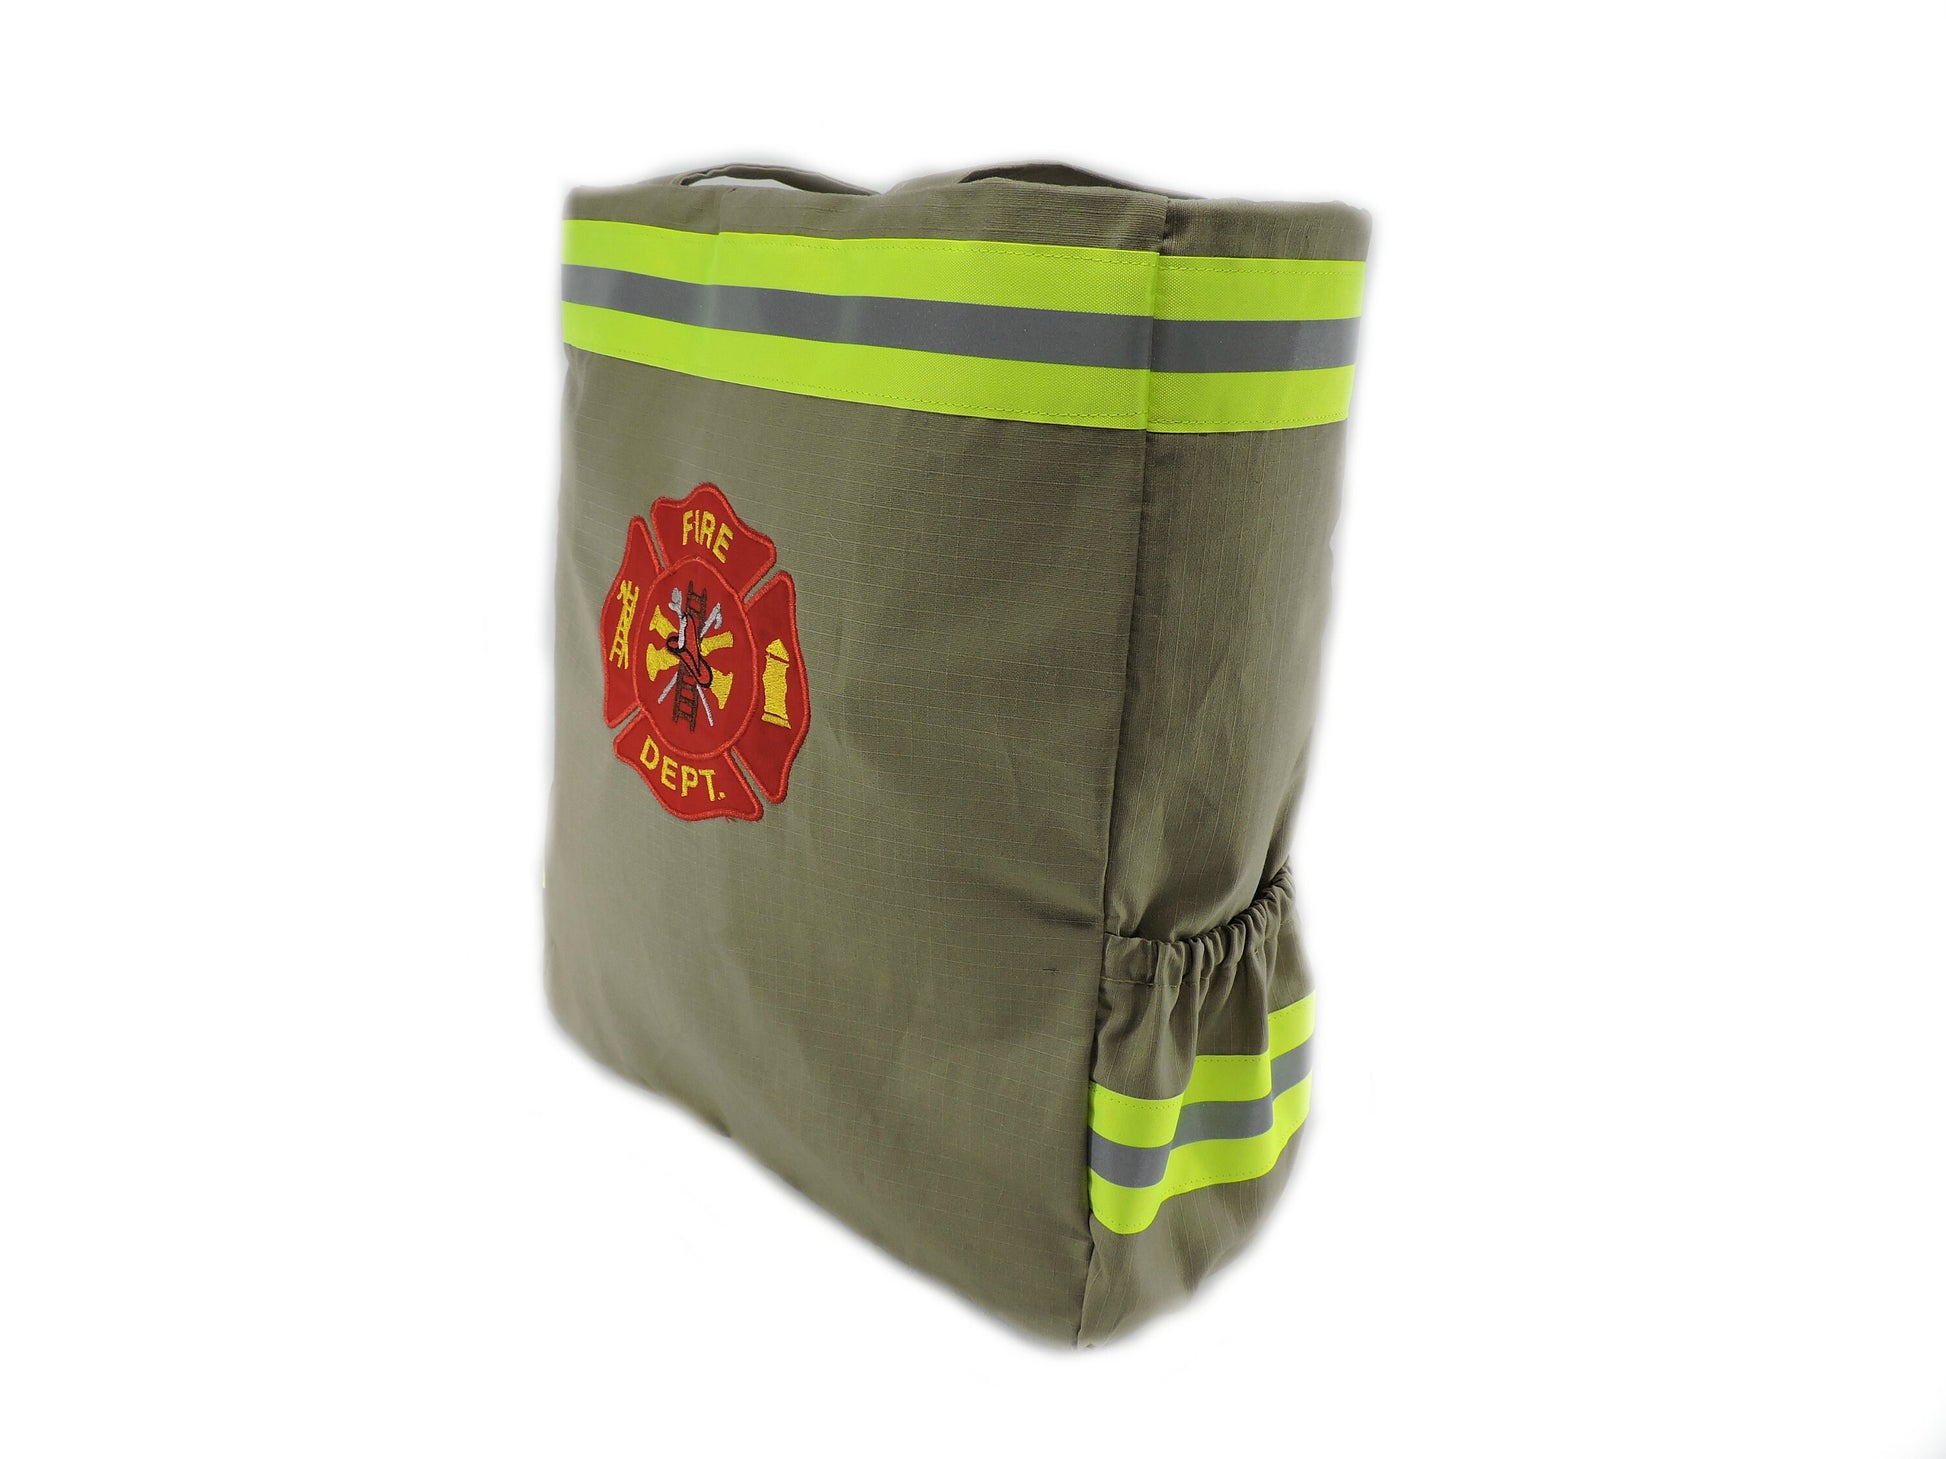 tan style firefighter diaper bag maltese cross on one side name on the other side